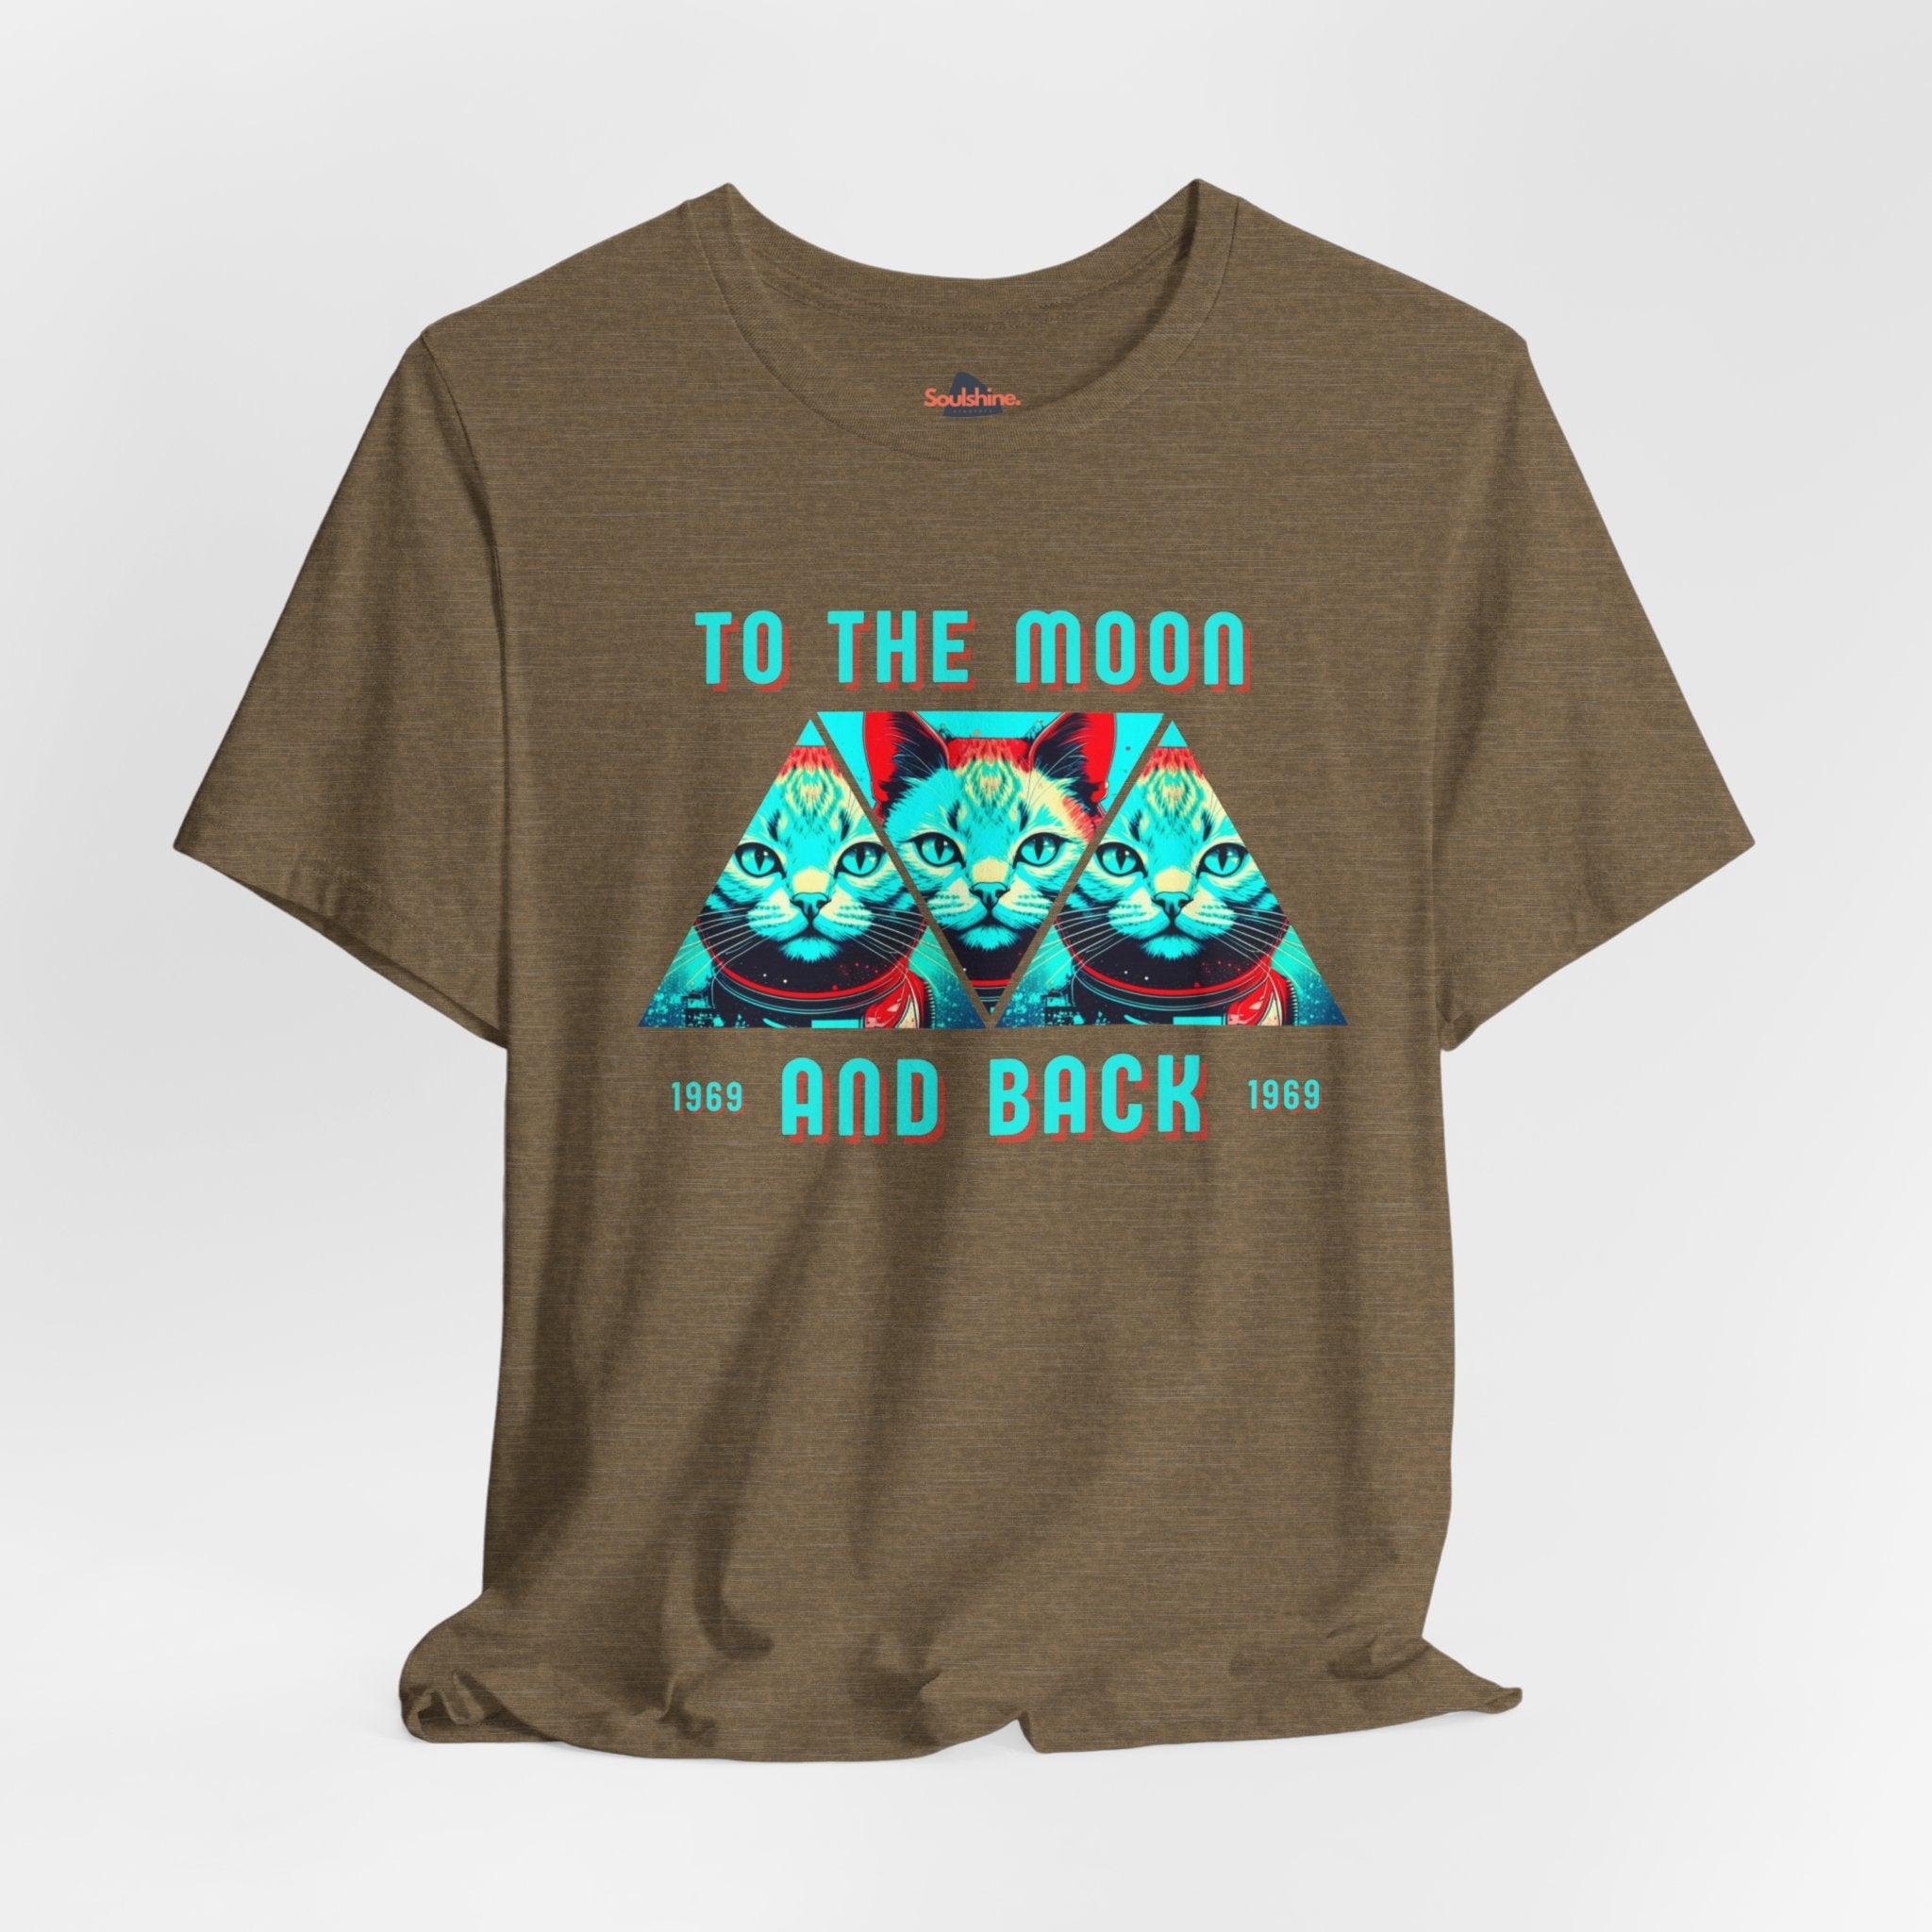 To the moon and back - Soulshinecreators - Unisex Jersey Short Sleeve Tee - US Heather Olive S T-Shirt by Soulshinecreators | Soulshinecreators